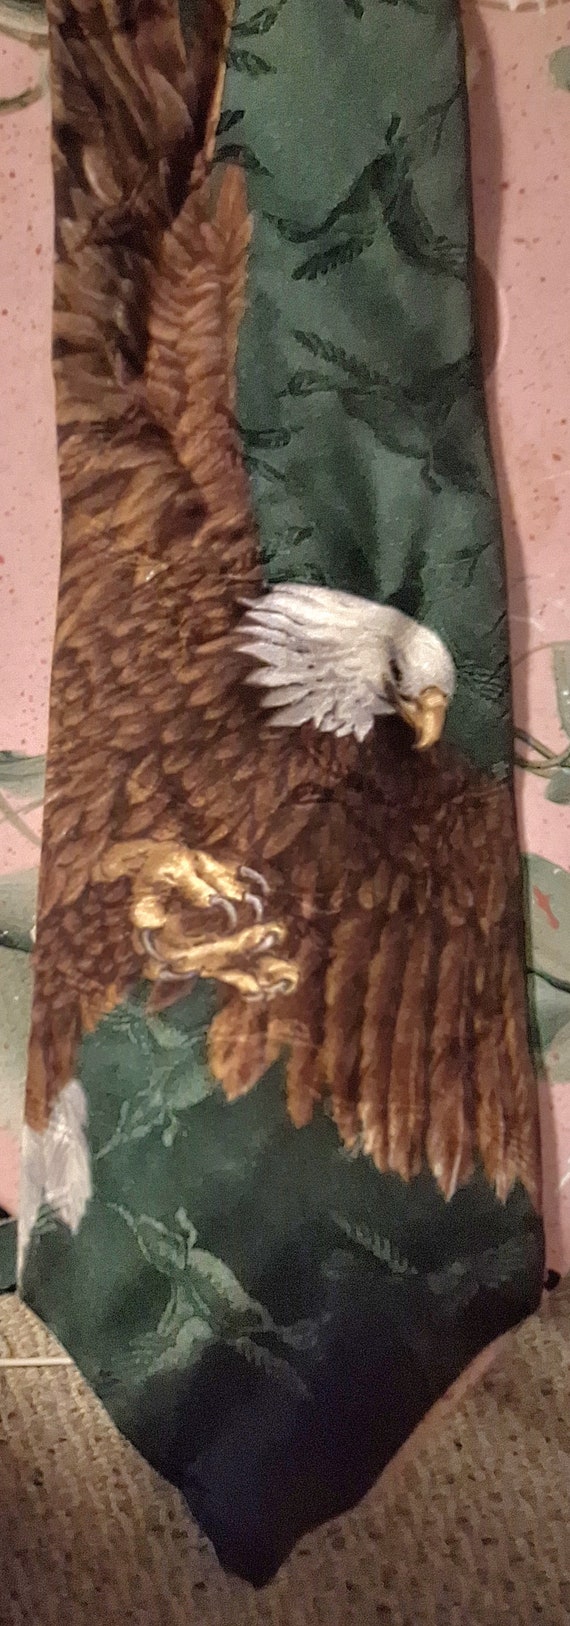 Field and Stream, eagle necktie - image 1